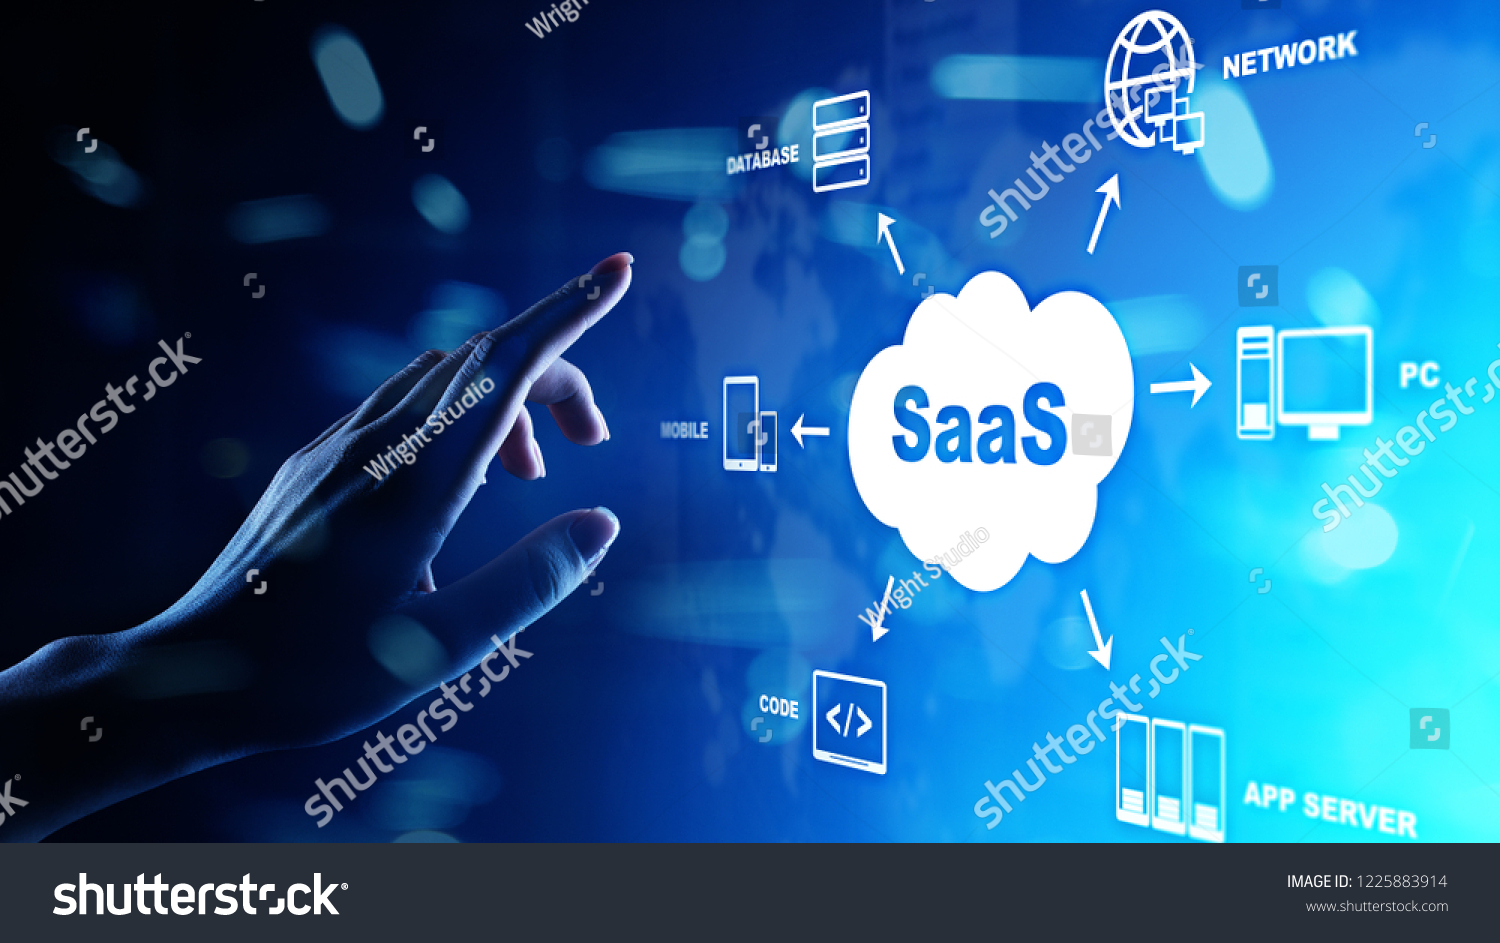 stock-photo-saas-software-as-a-service-on-demand-internet-and-technology-concept-on-virtual-screen-1225883914.jpg